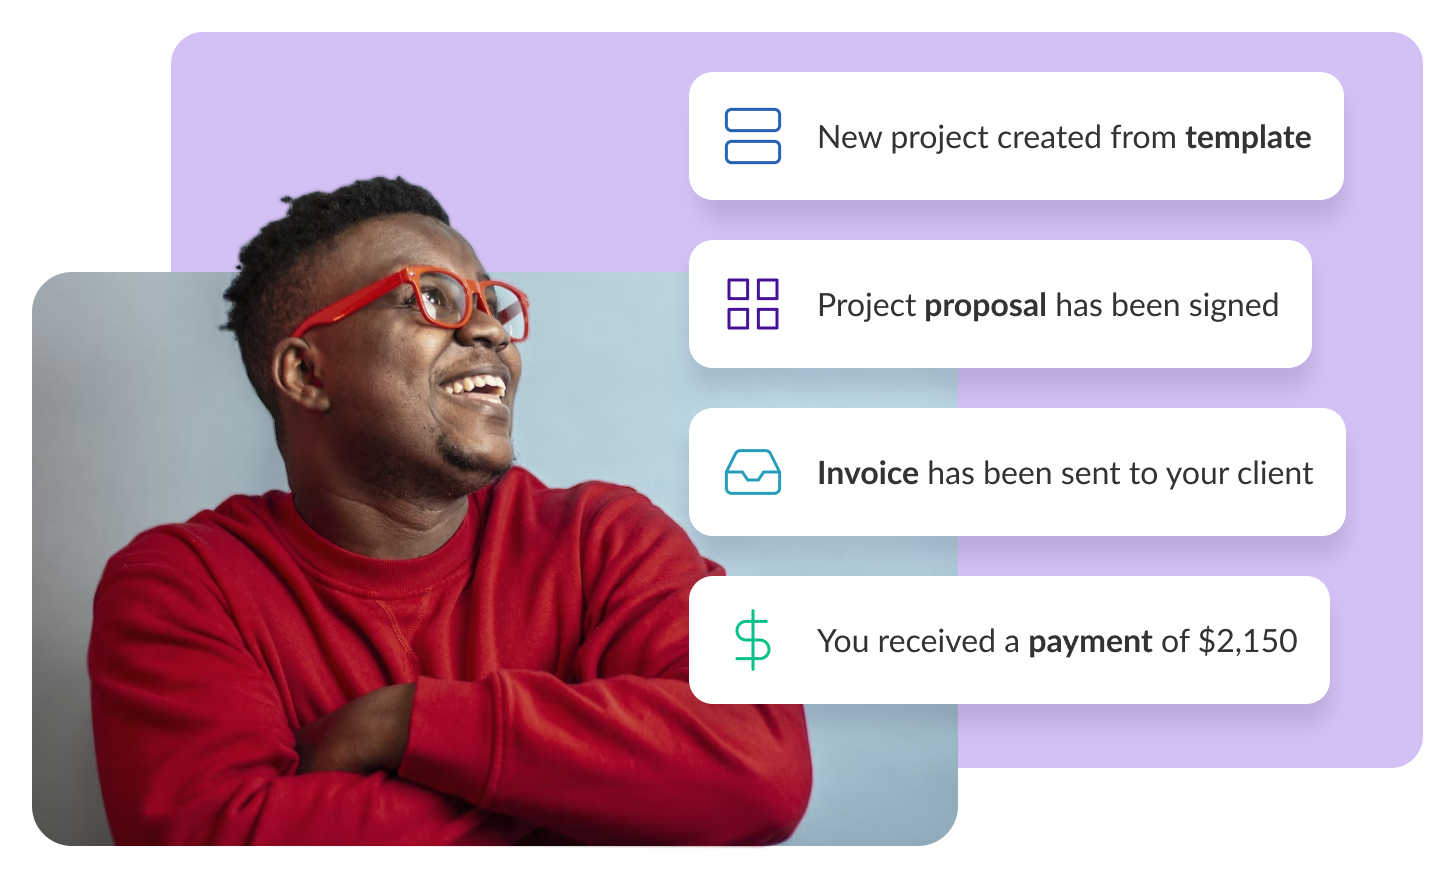 Take your project creation time from hours to minutes with Wethos' scope of work template library. Send proposals with project goals, scopes, and contract terms to clients for signature. Create and send invoices, and get paid seamlessly.